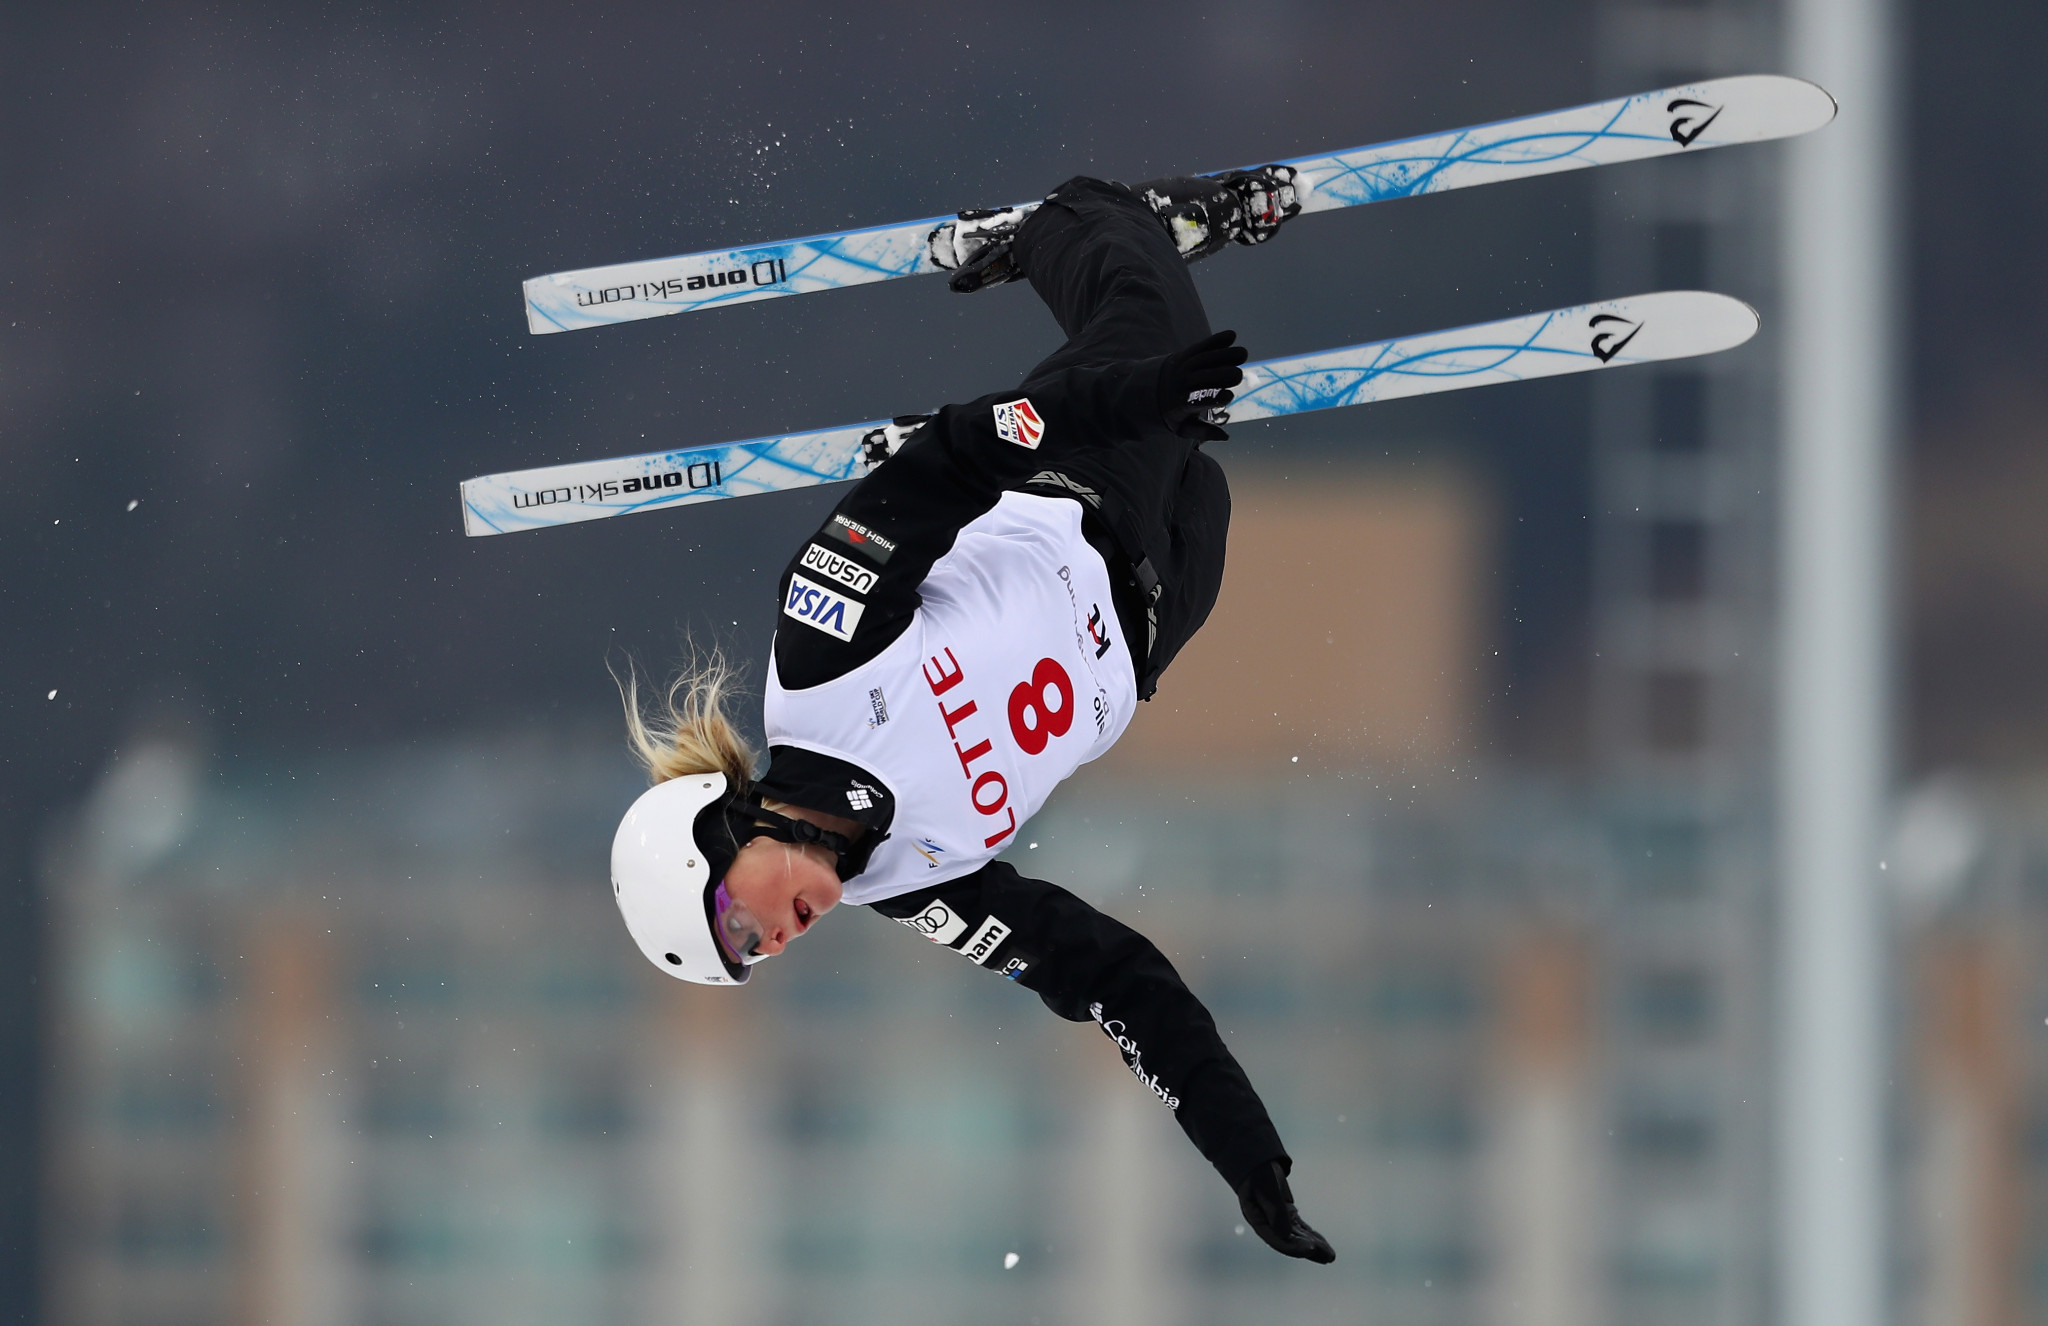 McKinnon and Kushnir triumph at Aerials World Cup in Moscow